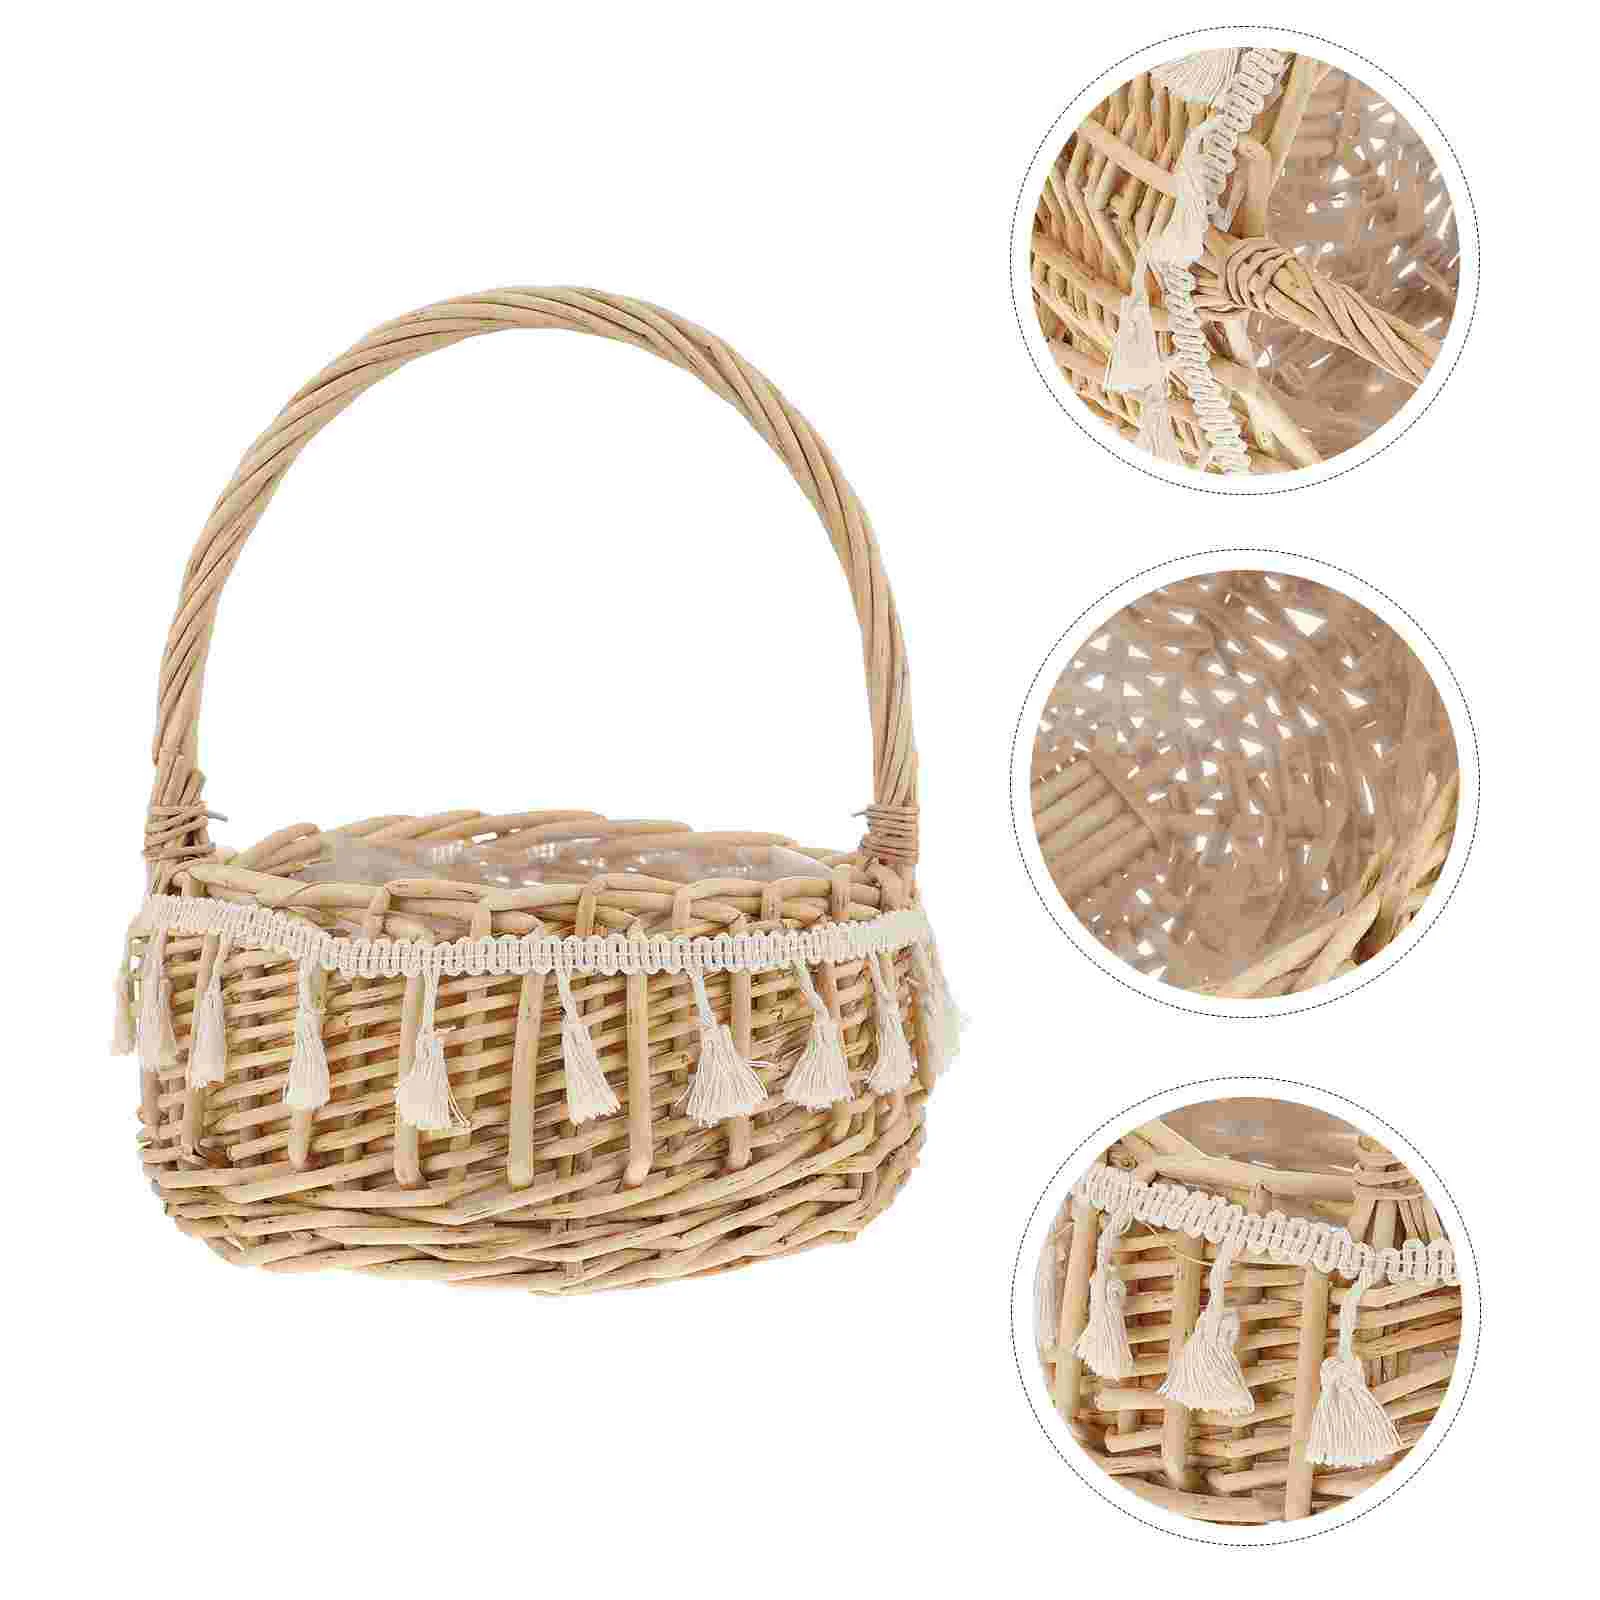 

Willow Flowers Bride Delicate Basket Baskets Baskert Wedding Storage Container Portable Kids Wooden Toys Girl